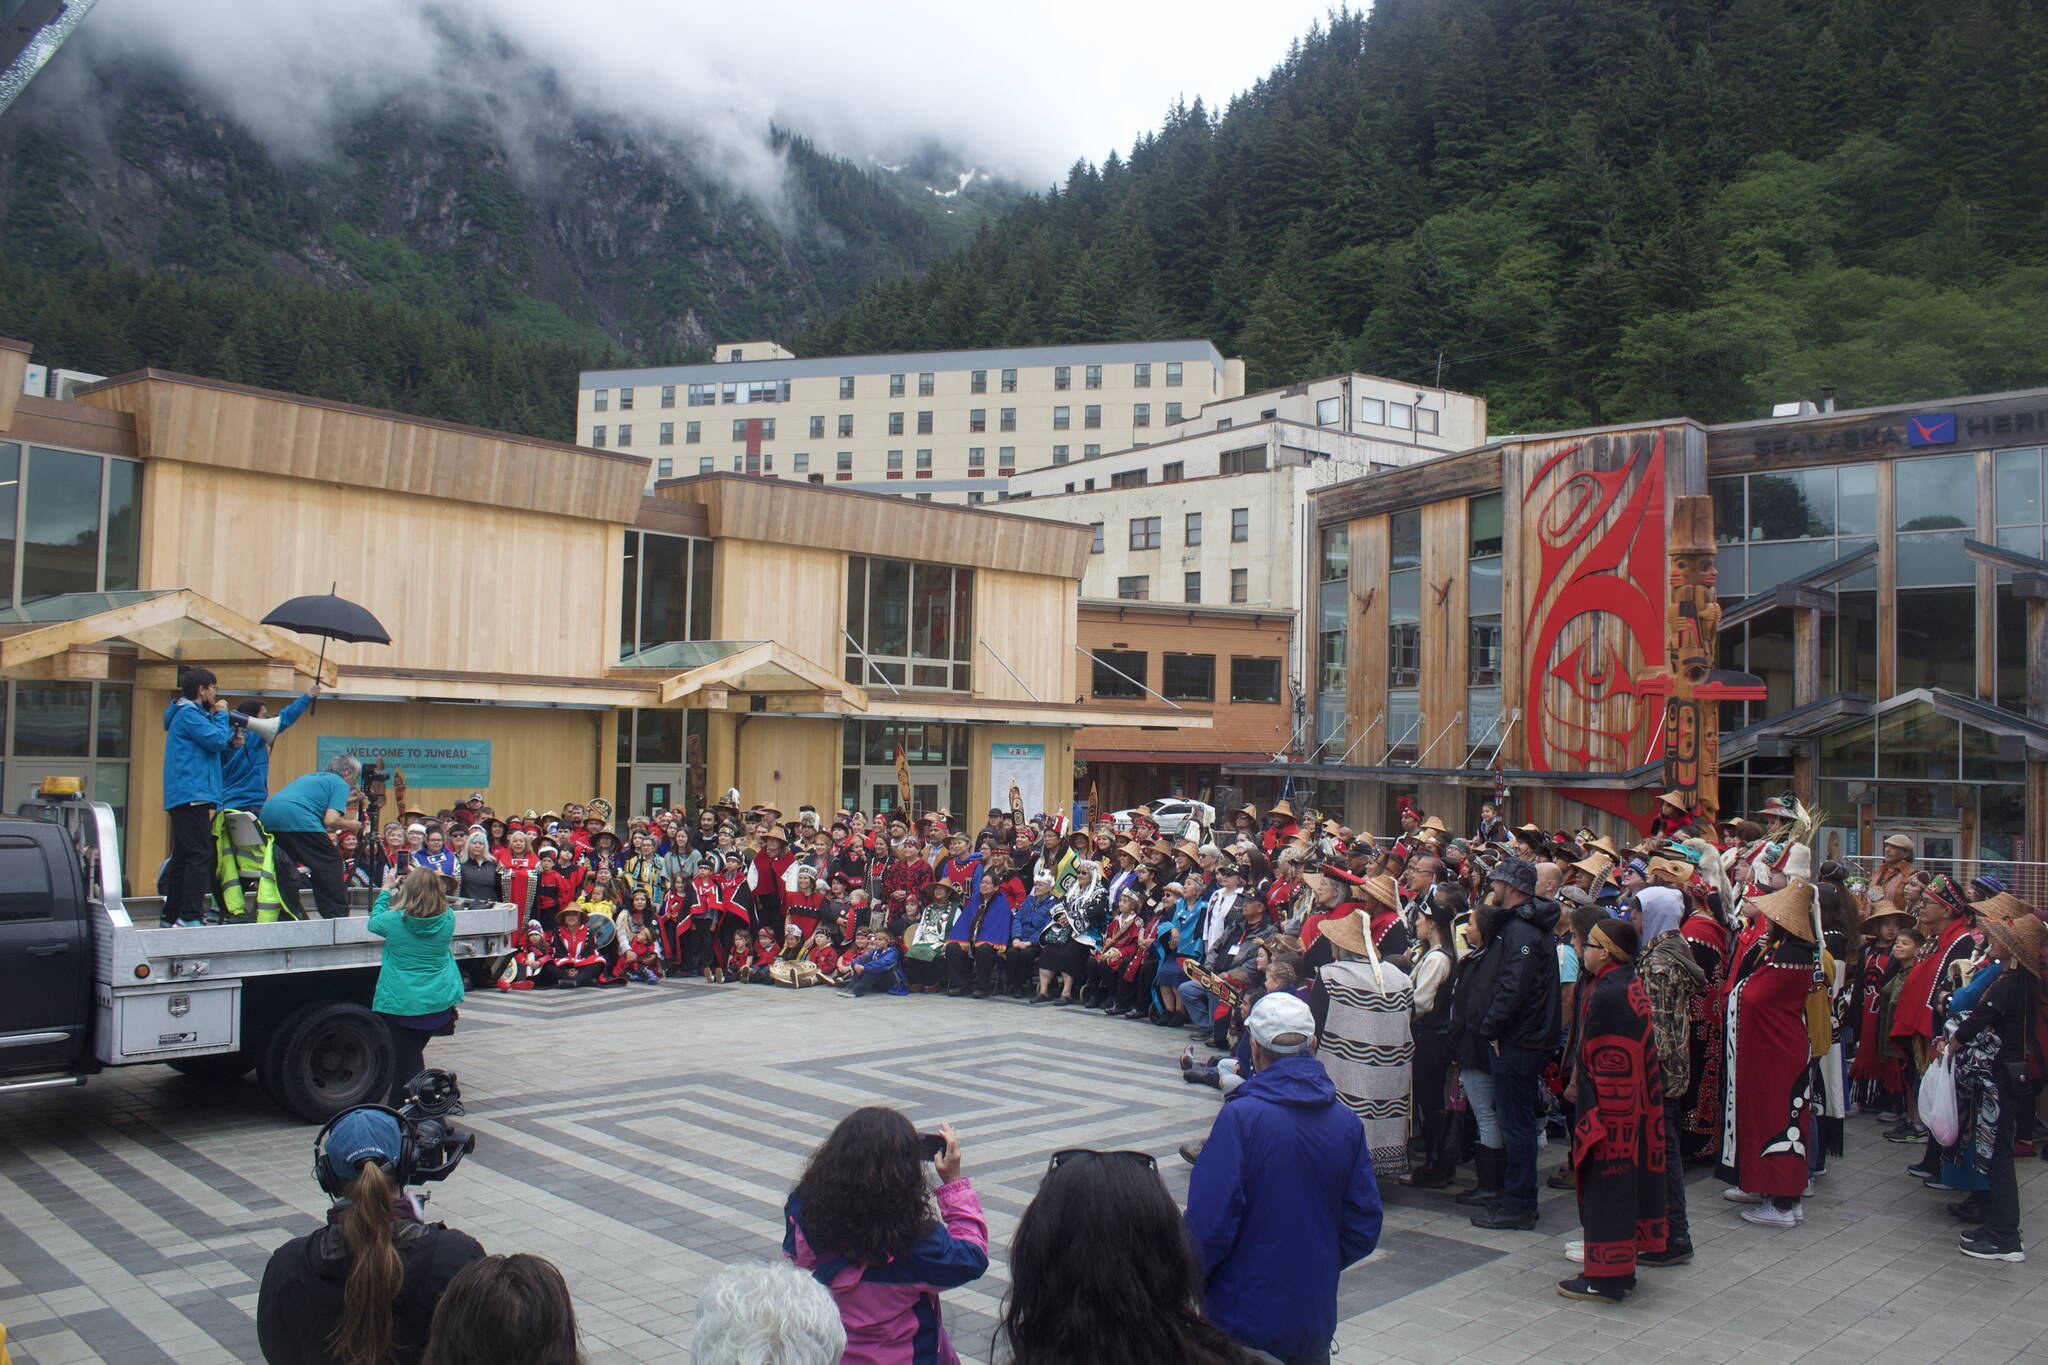 Most of the 1,200 dancers participating in Celebration this year gather for a group photo at the newly opened Sealaska Heritage Campus on Saturday morning just before the parade to Centennial Hall for the final events of the four-day gathering. (Mark Sabbatini / Juneau Empir